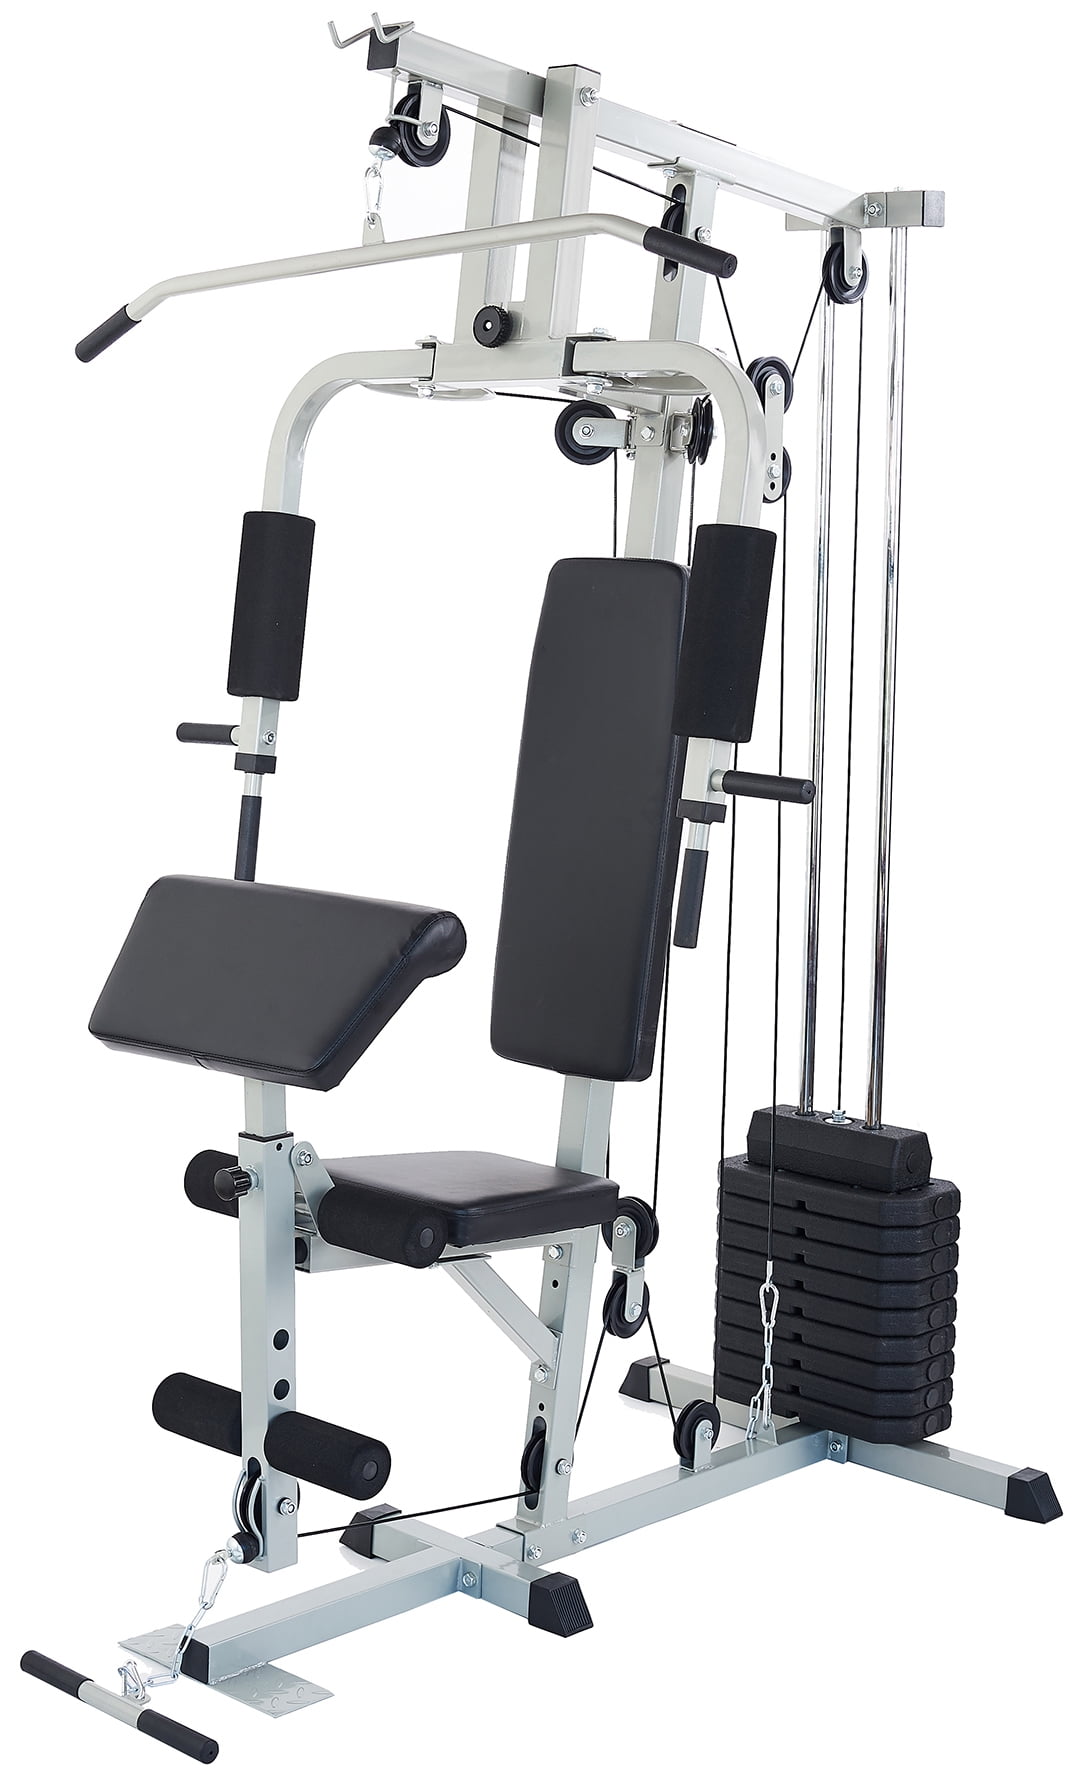 At-Home Workout Equipment I've Been Loving